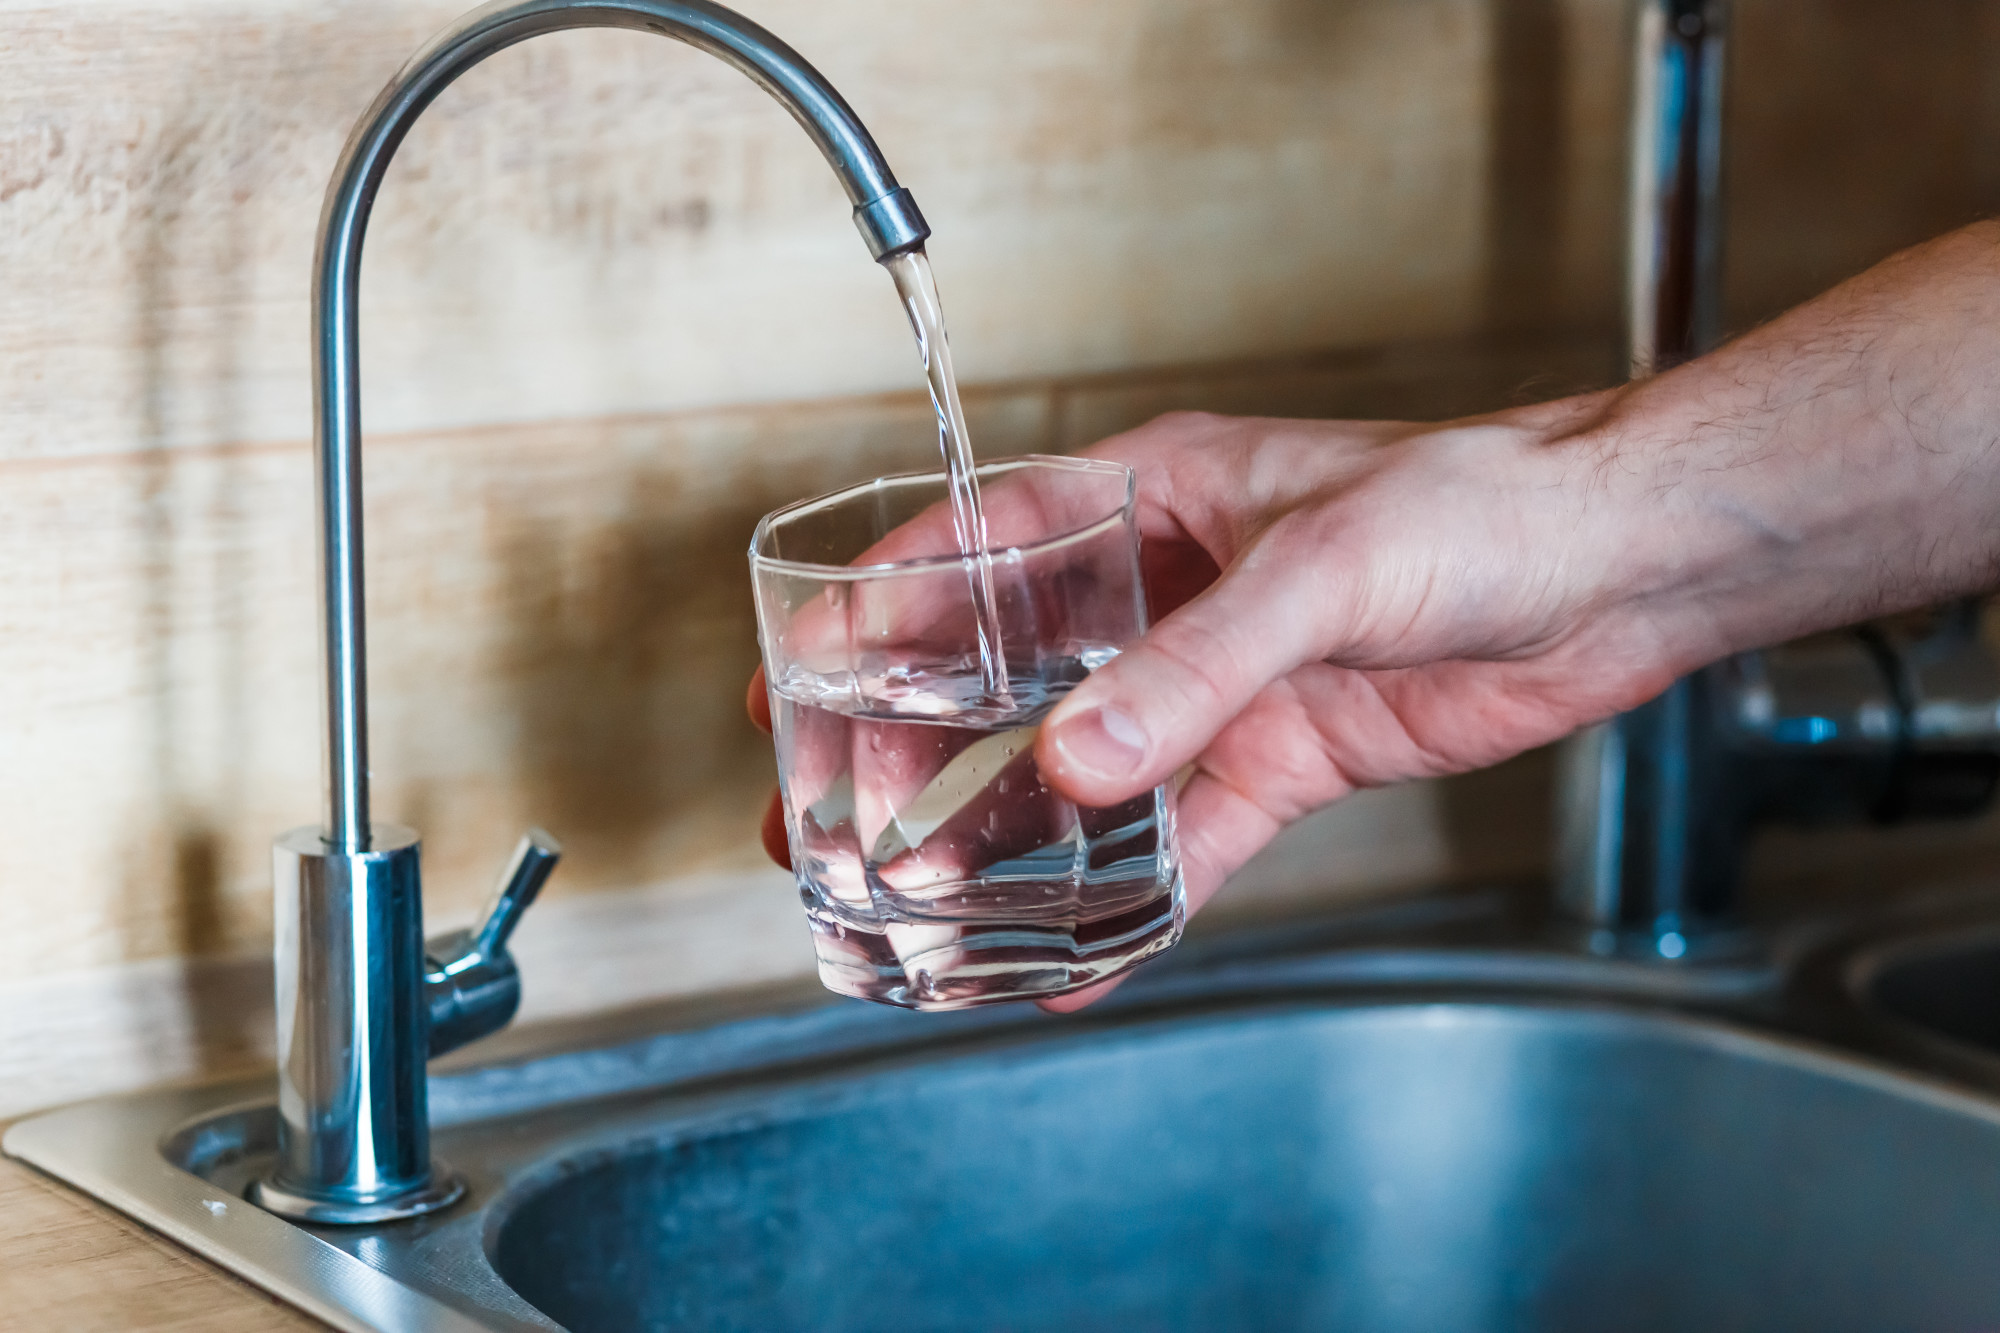 Is My Tap Water Safe to Drink? 4 Warning Signs of Water Contamination